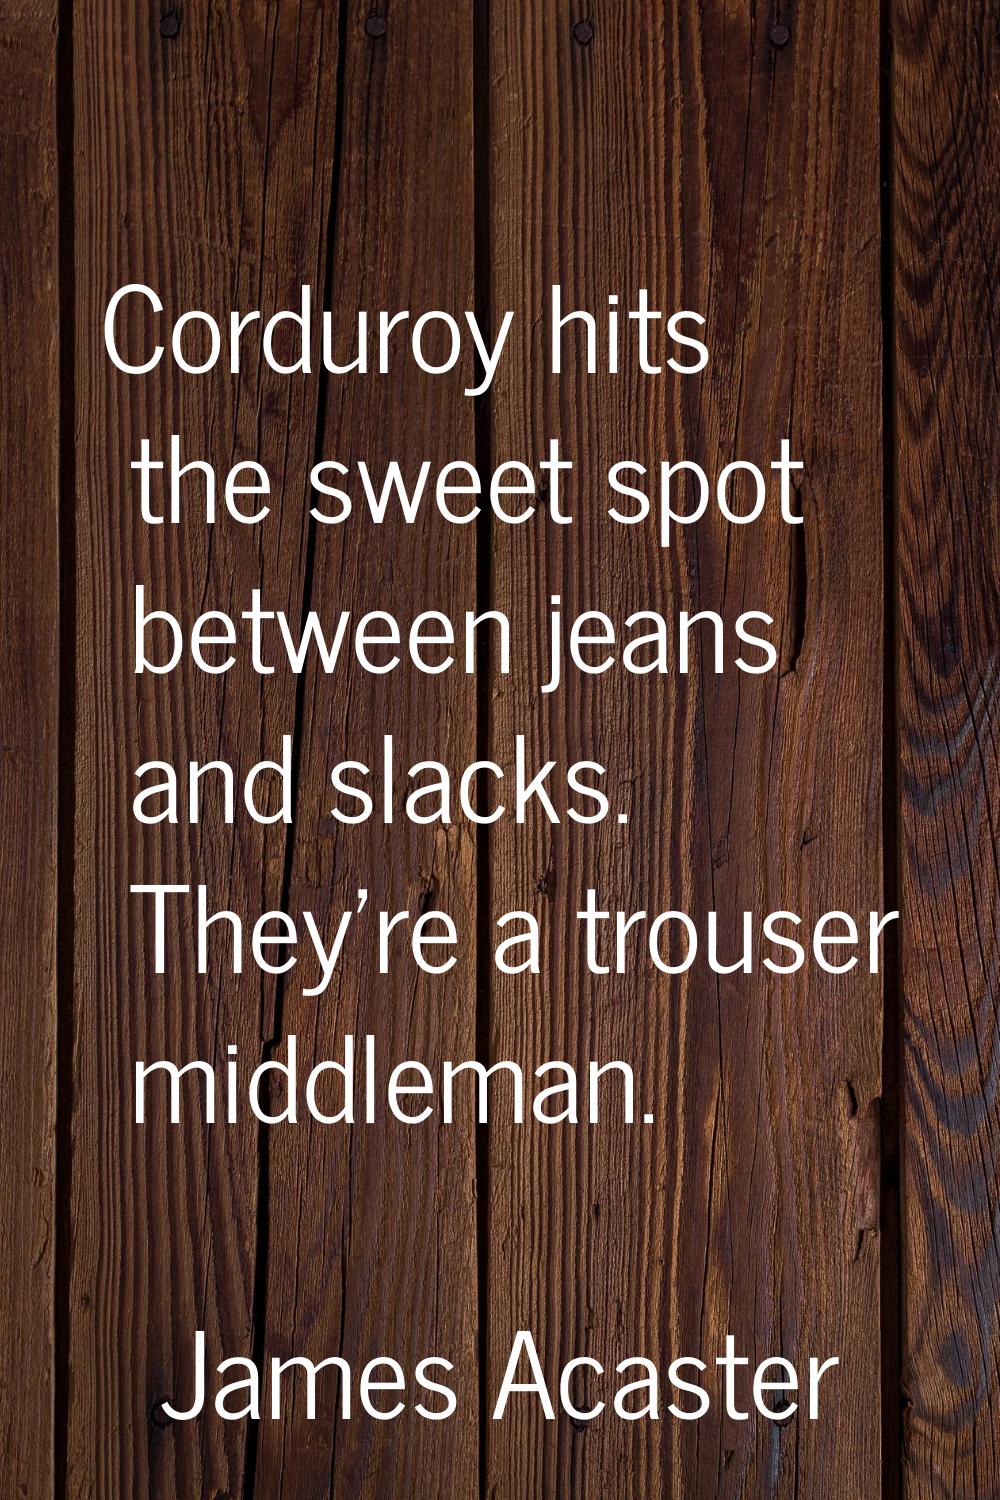 Corduroy hits the sweet spot between jeans and slacks. They're a trouser middleman.